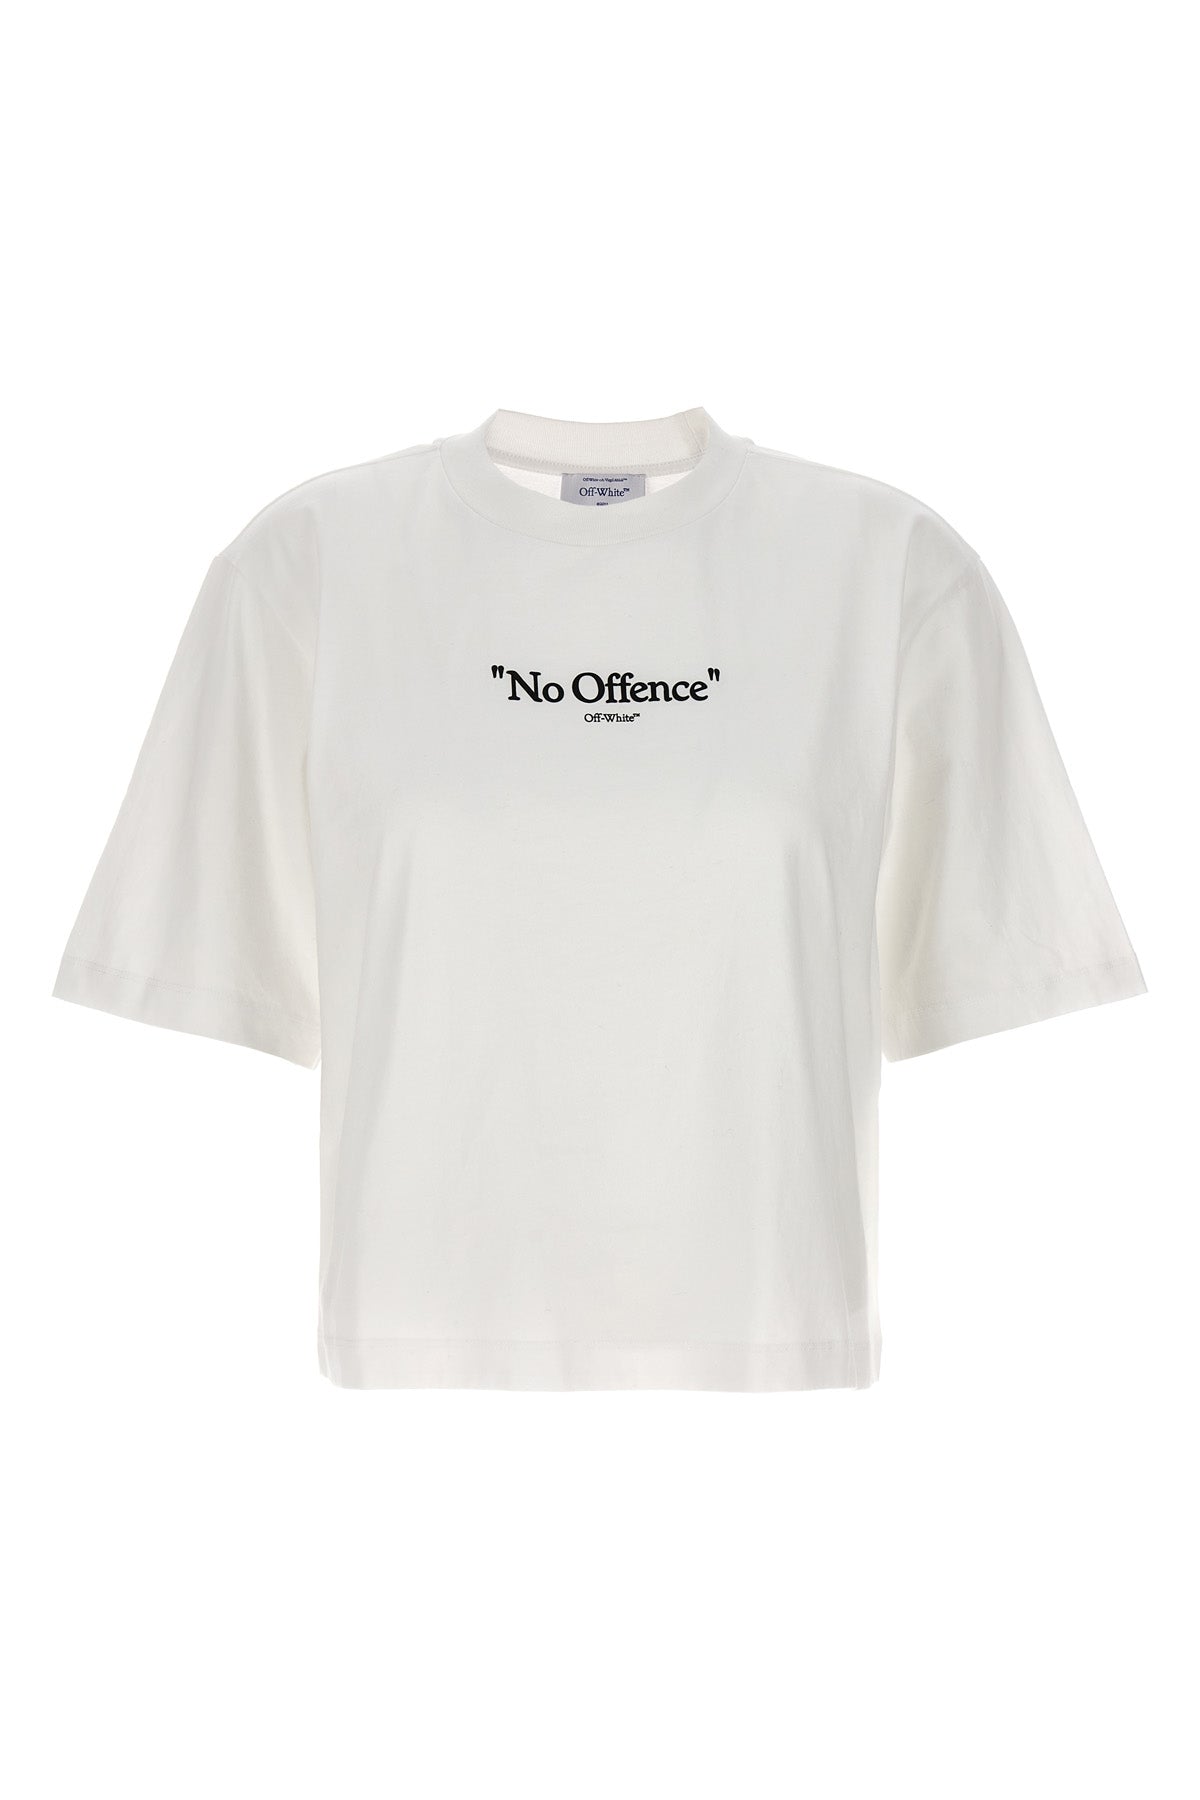 OFF-WHITE 'NO OFFENCE' T-SHIRT